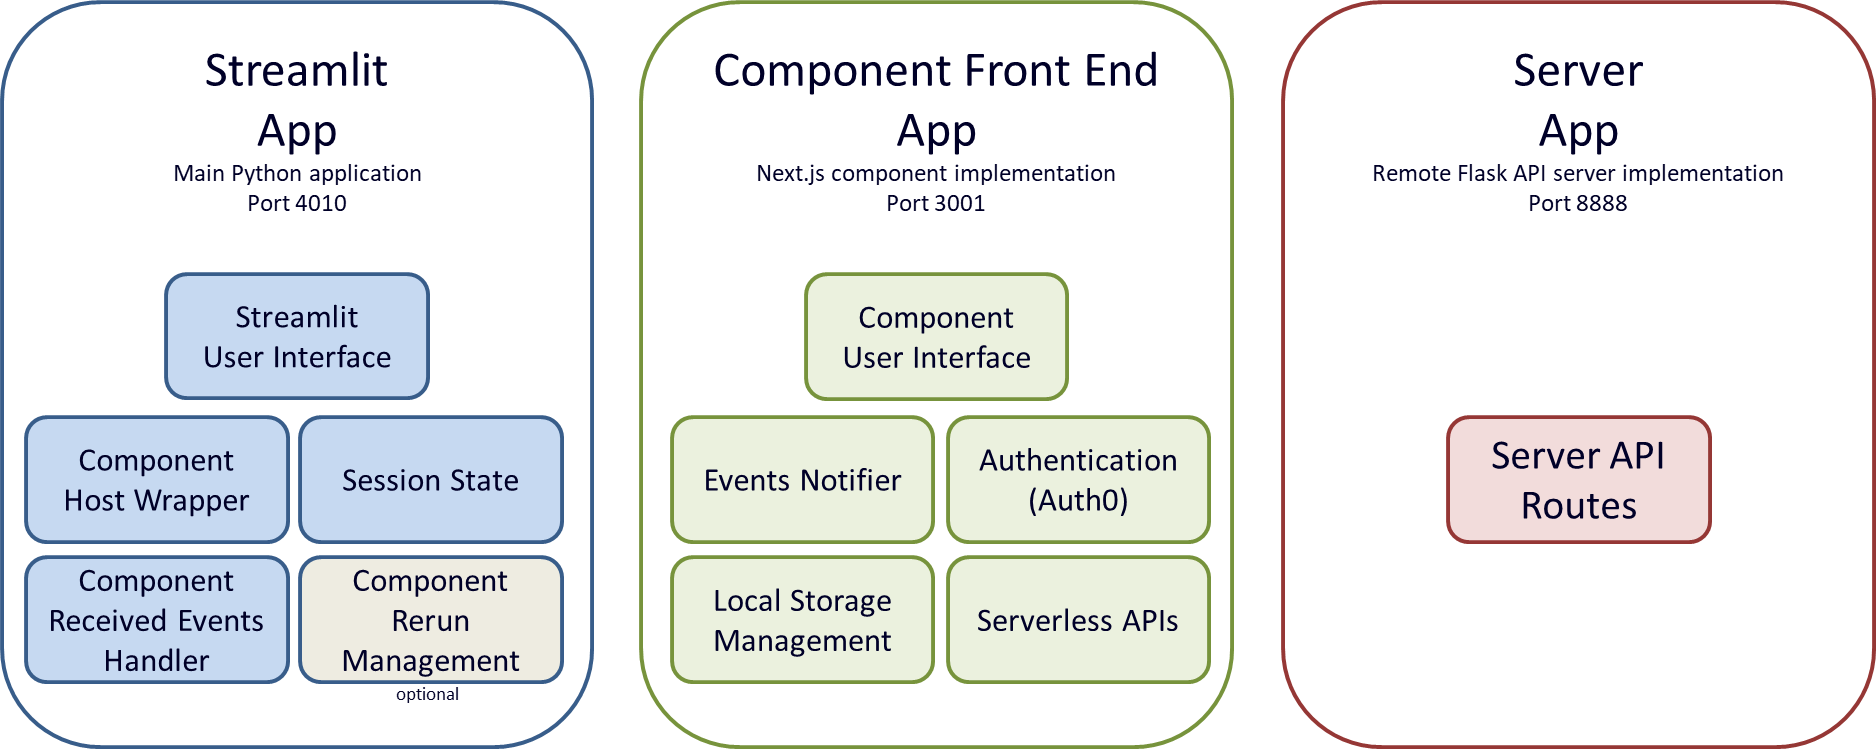 Capabilities of Component Auth0